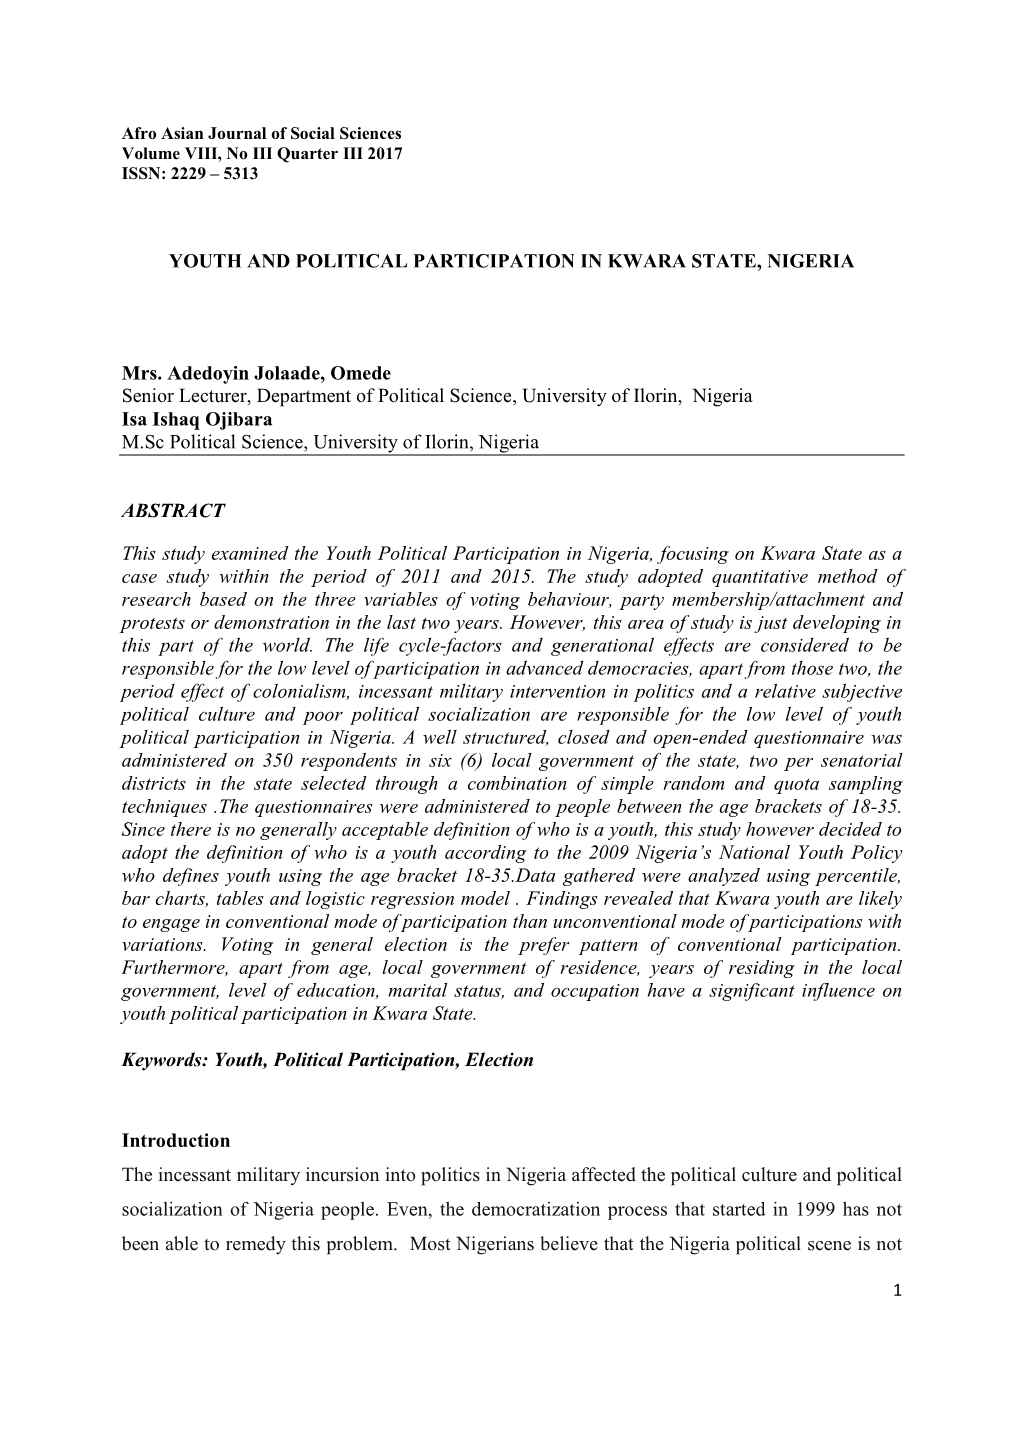 Youth and Political Participation in Kwara State, Nigeria